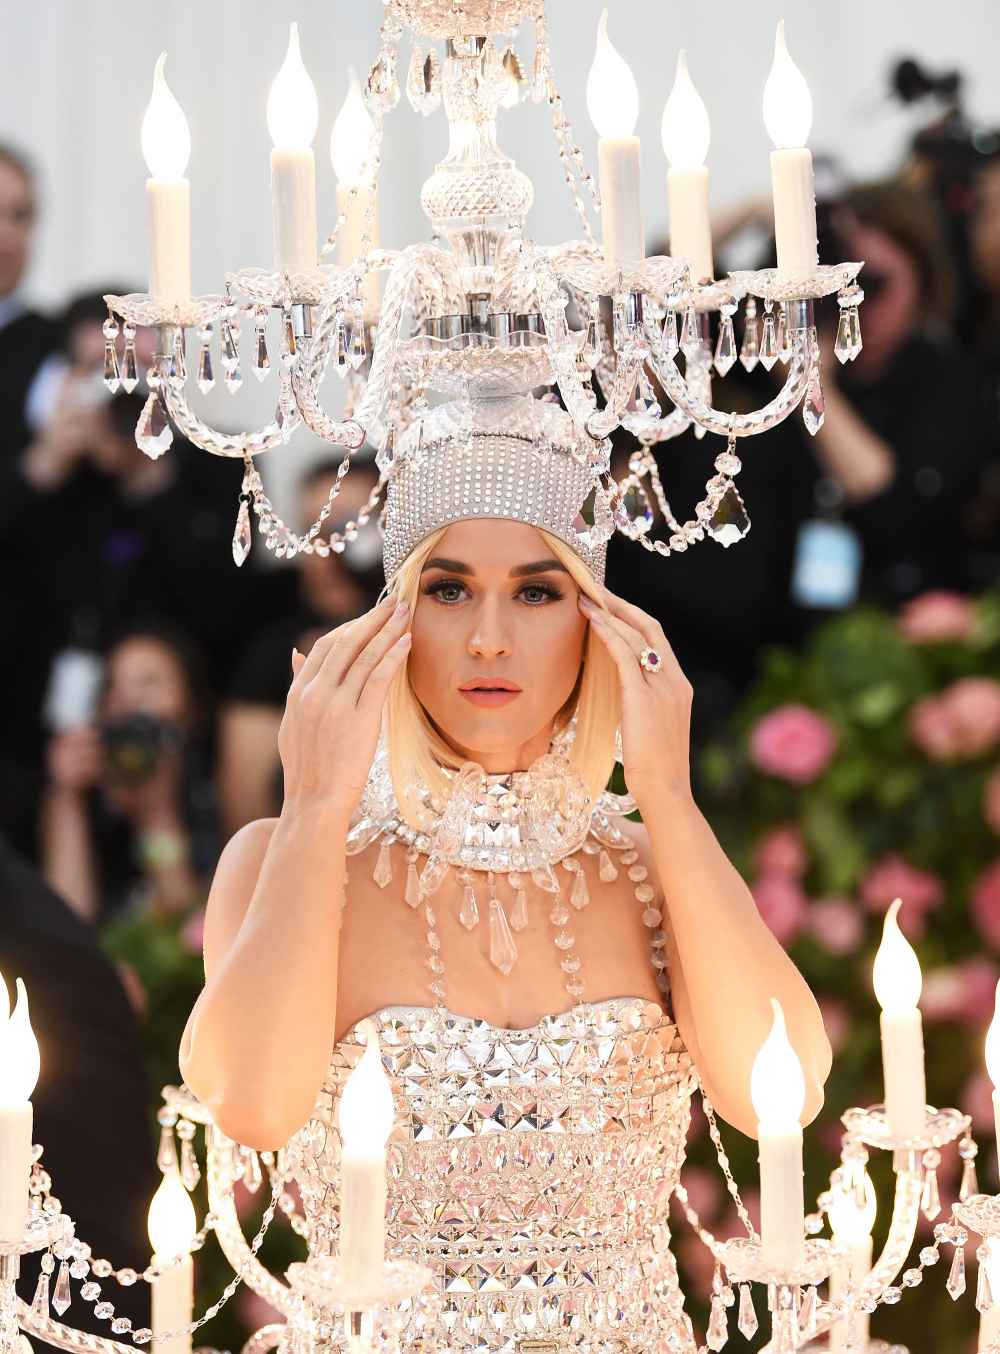 Chandelier Hats! Smurfette Dresses! Katy Perry's Craziest Style